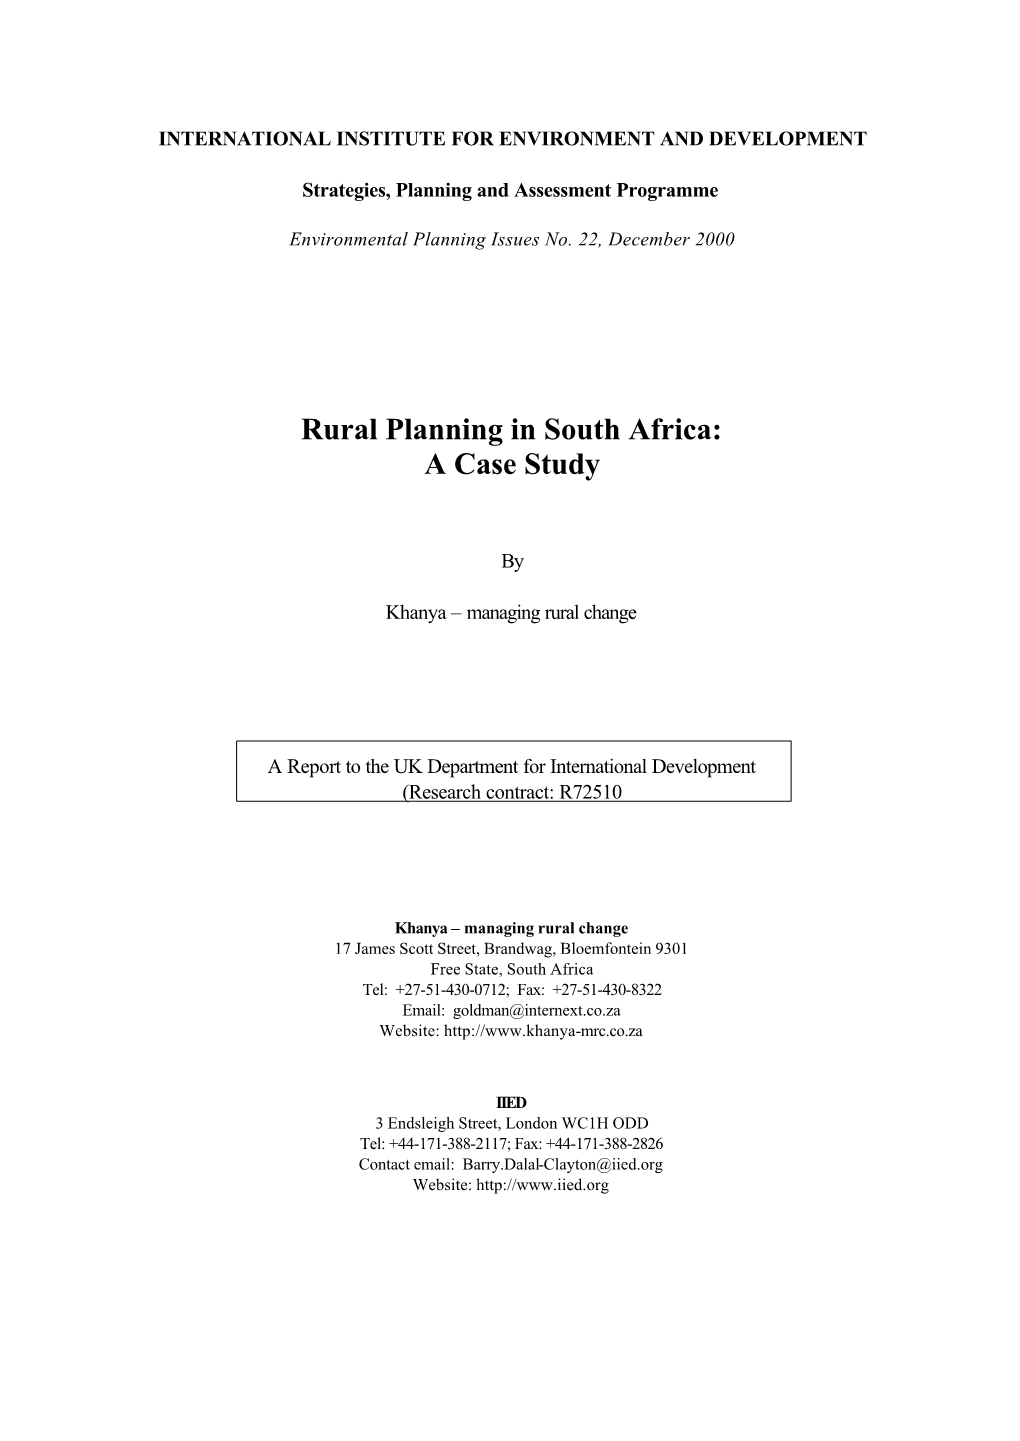 Rural Planning in South Africa: a Case Study